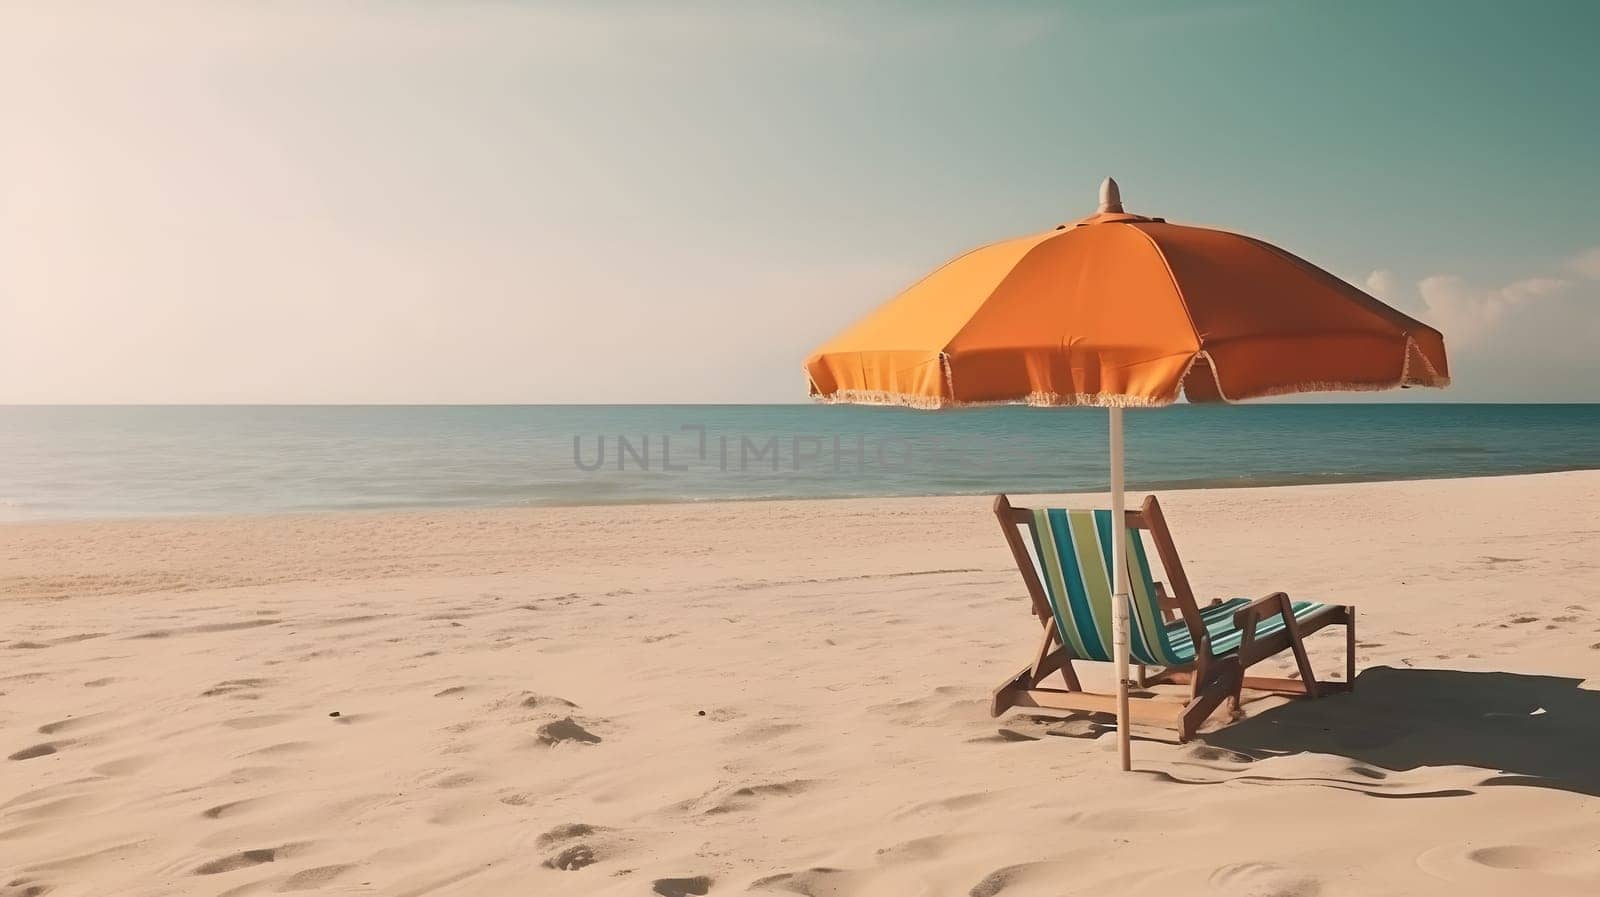 Beach umbrella with chair on the sand beach, neural network generated art by z1b